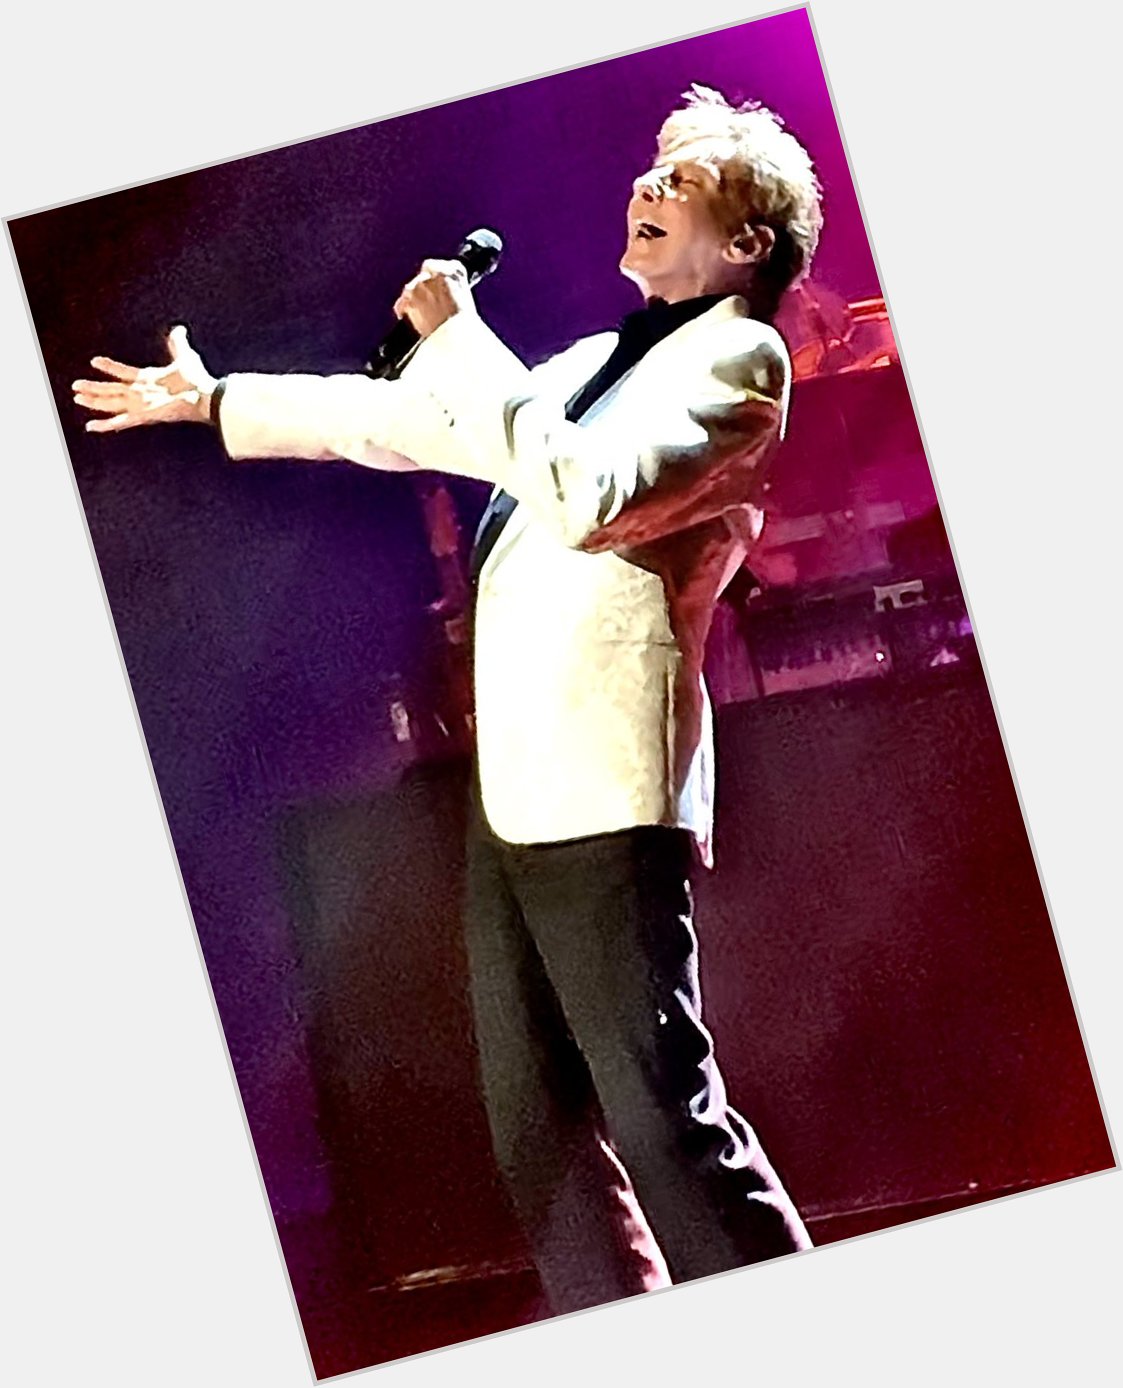  hey westgate see you in oct and happy birthday to our favorite entertainer Barry Manilow 